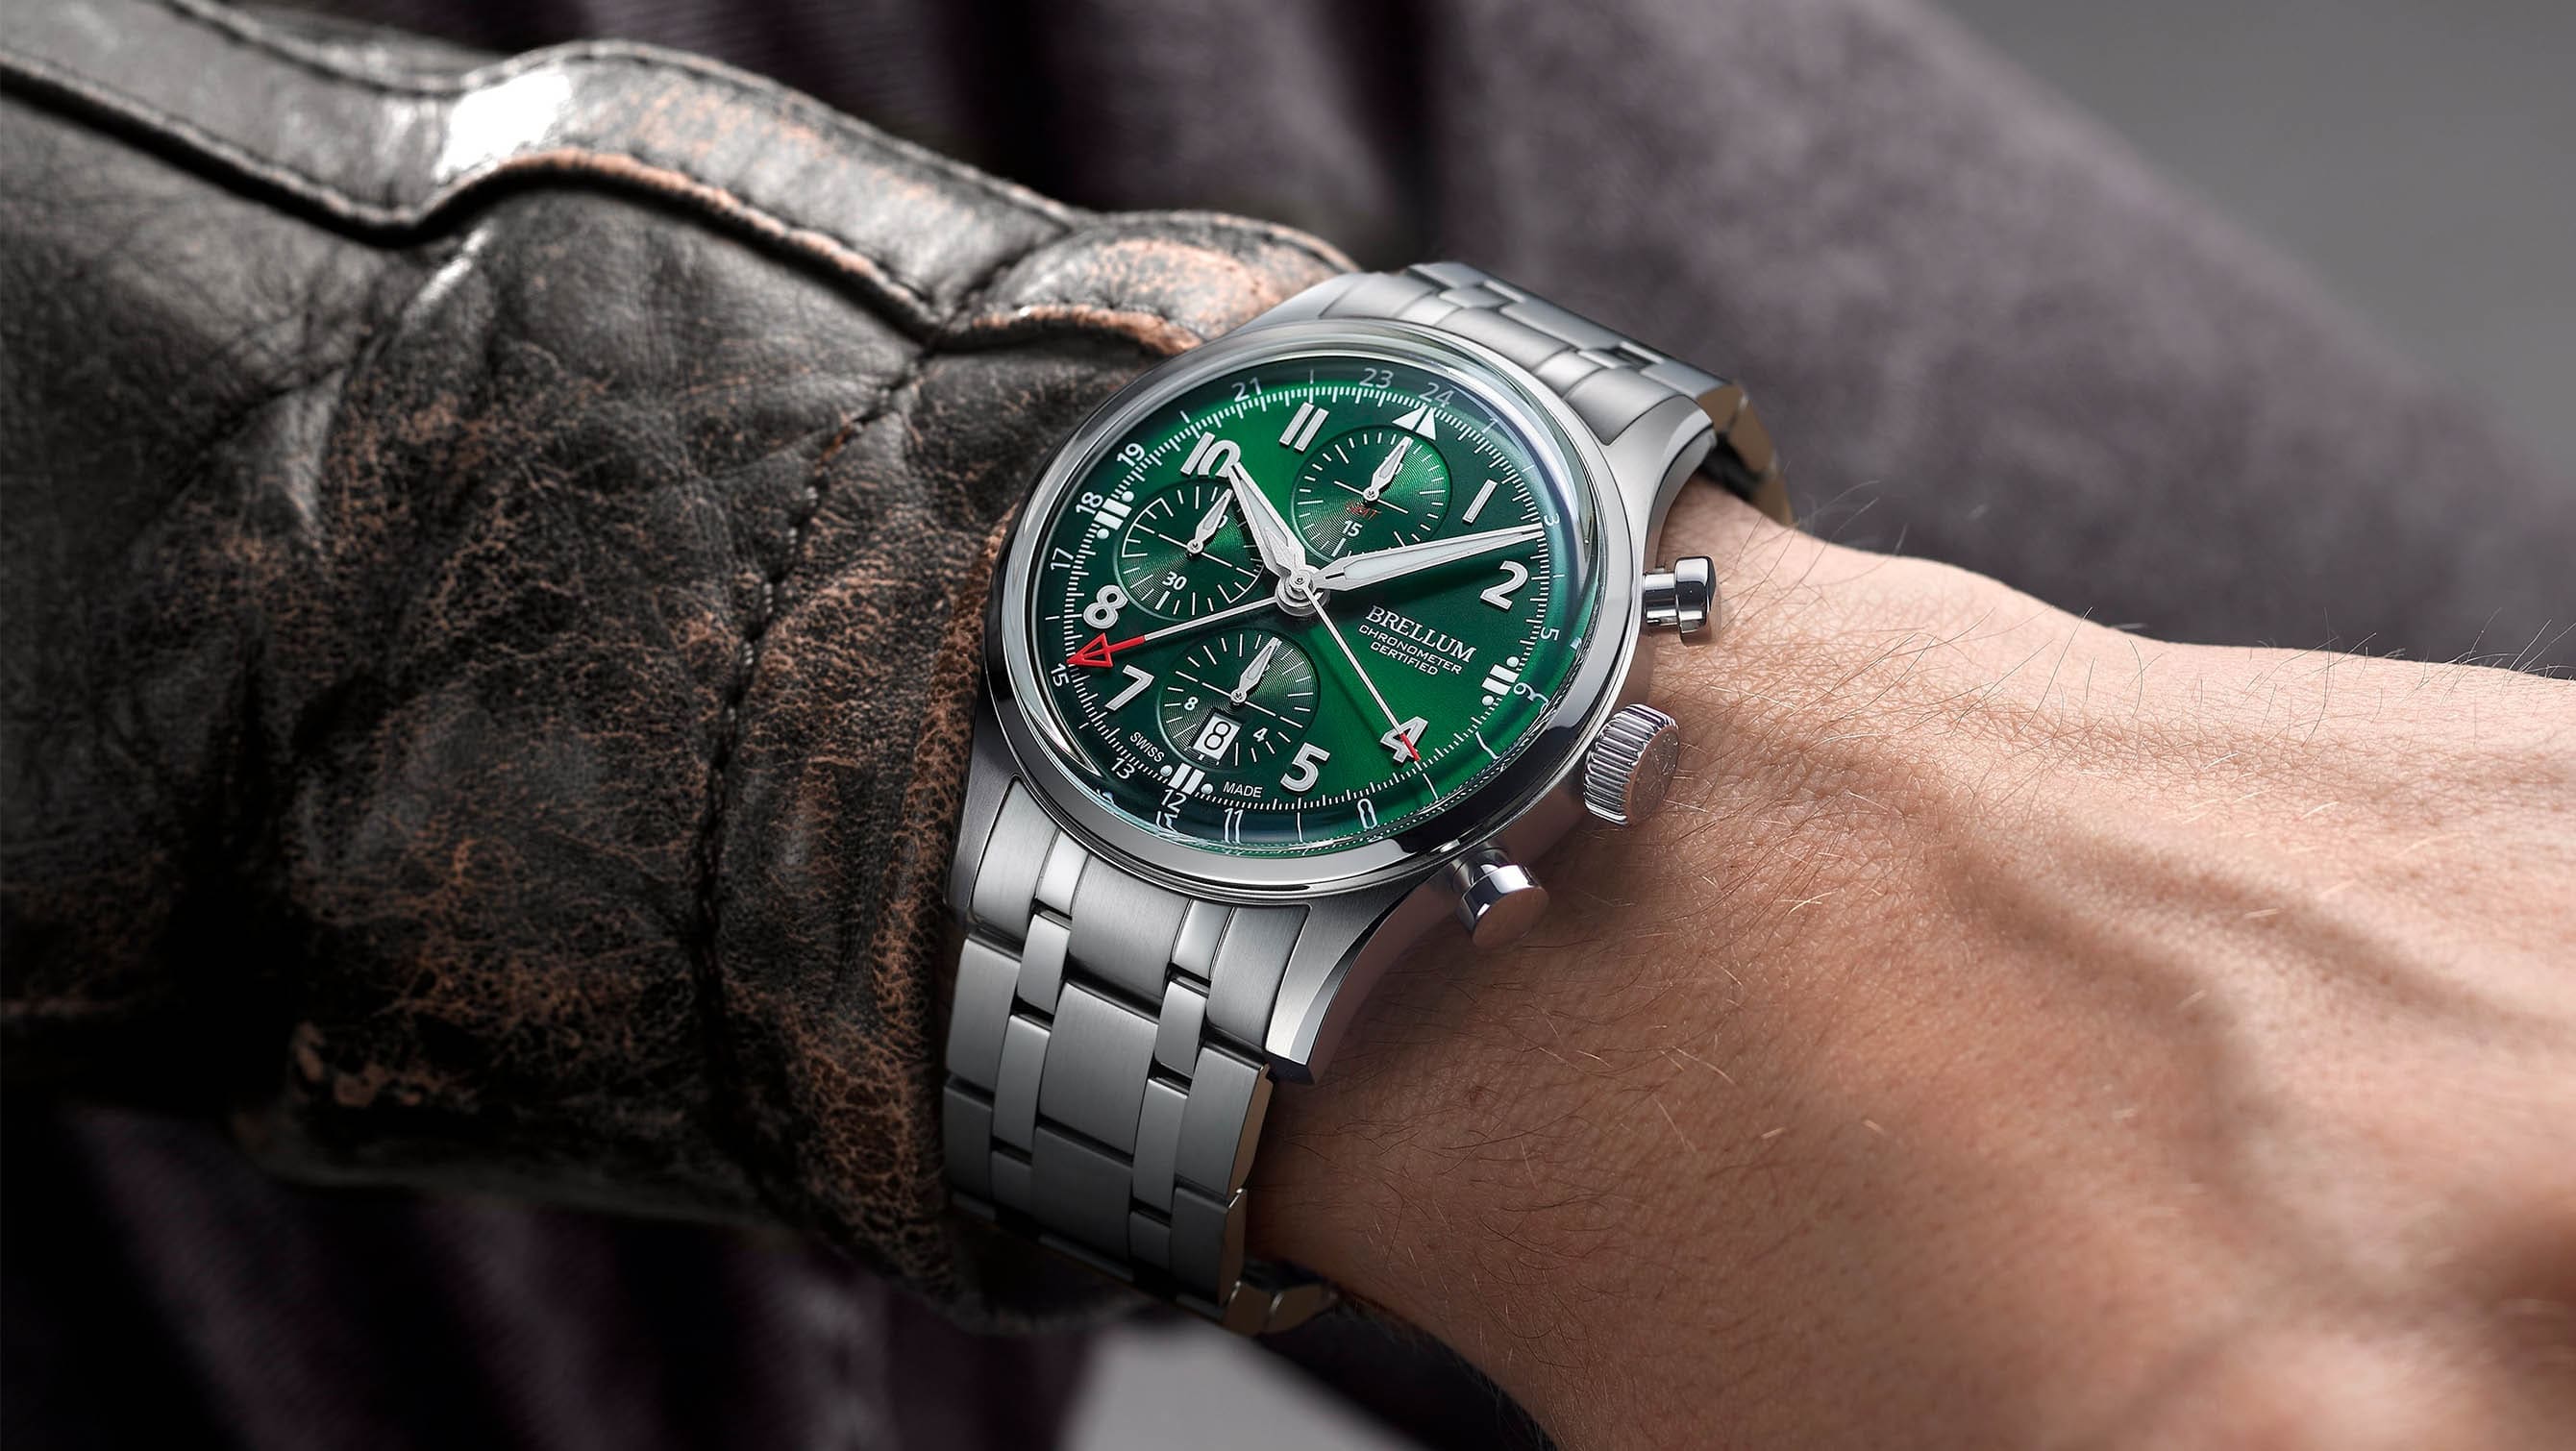 The Brellum Pilot GMT LE.3 is accessible luxury for pilots